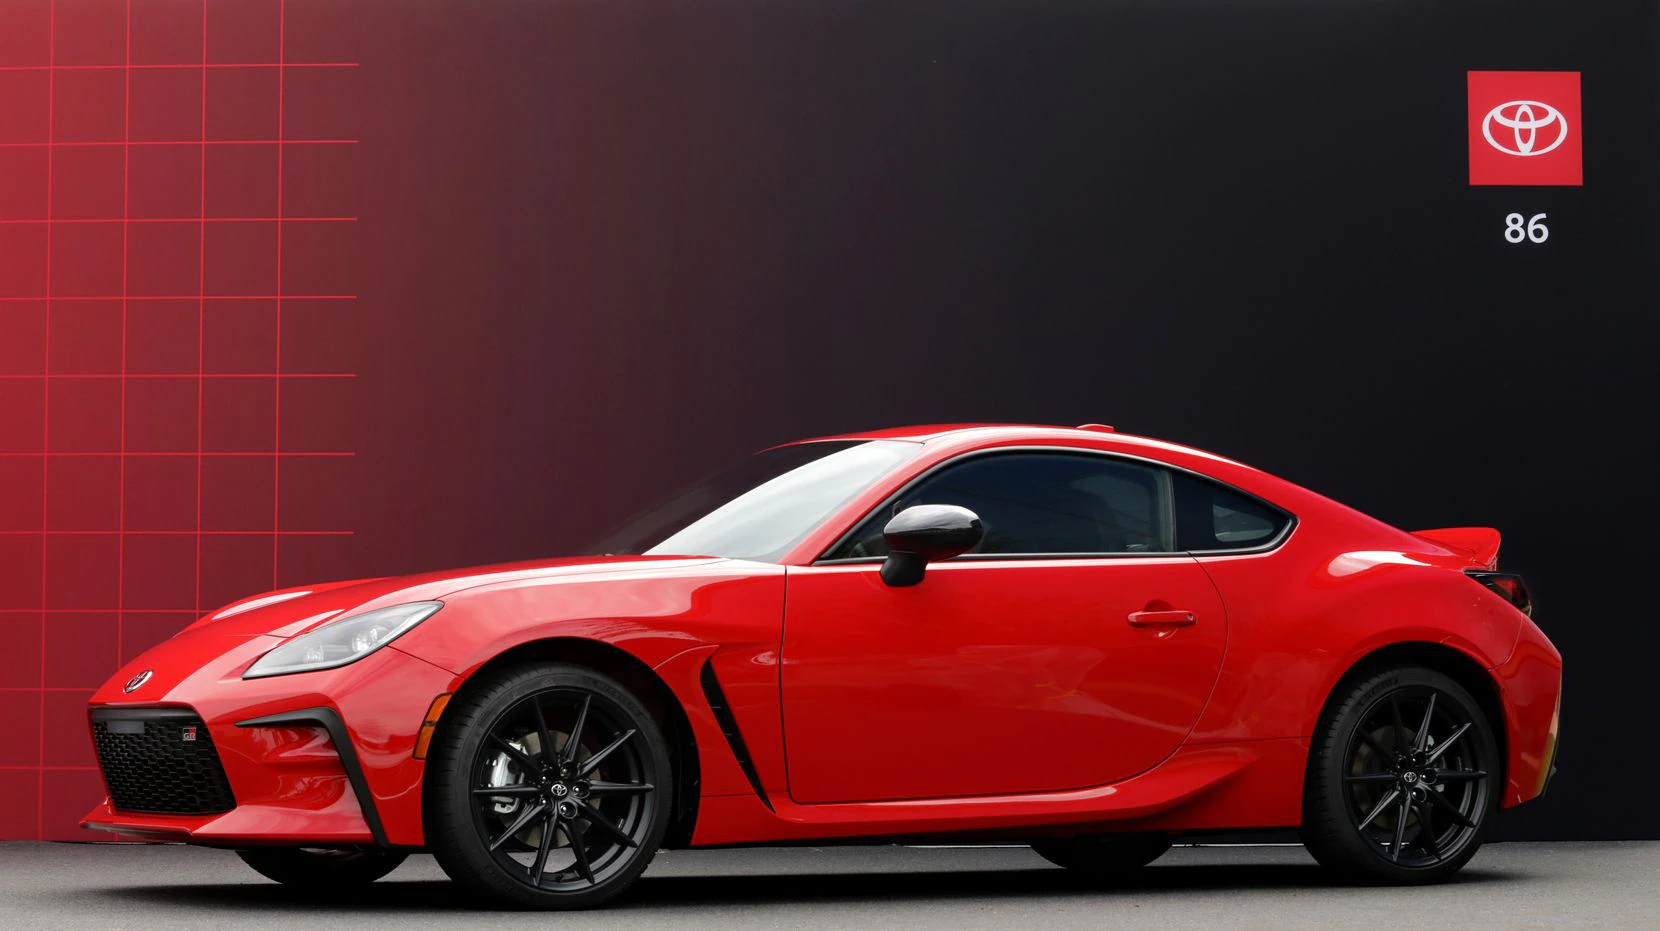 The limited-edition Supra.